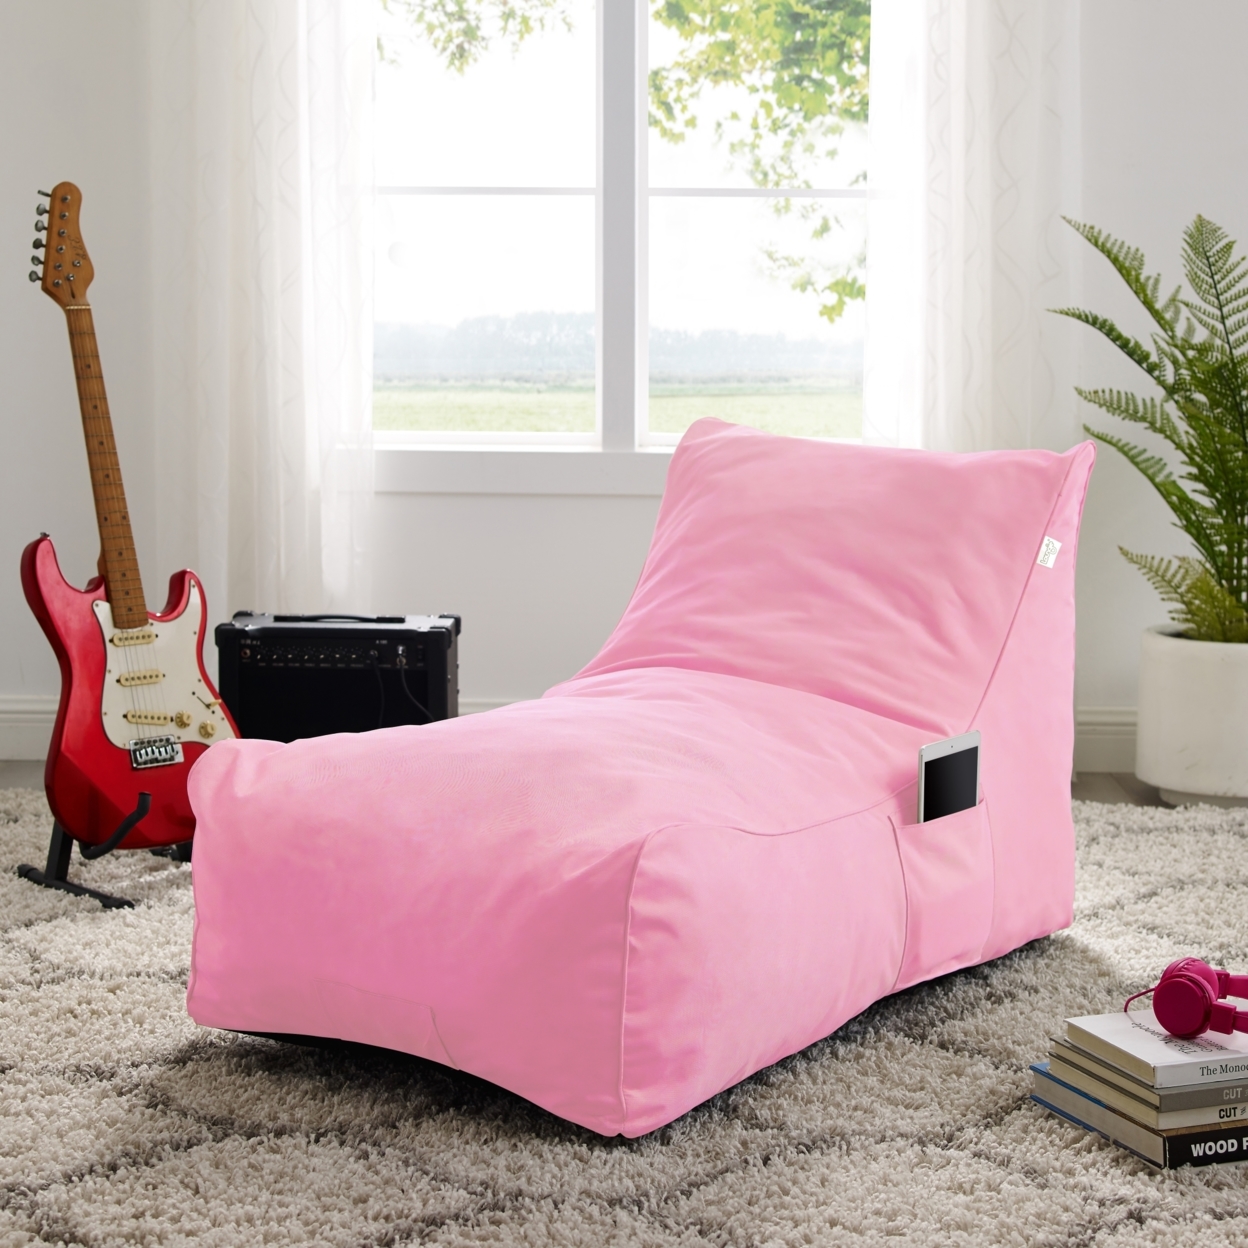 Loungie Resty Foam Lounge Chair-Nylon Bean Bag- Indoor- Outdoor-Self Expanding-Water Resistant - Pink